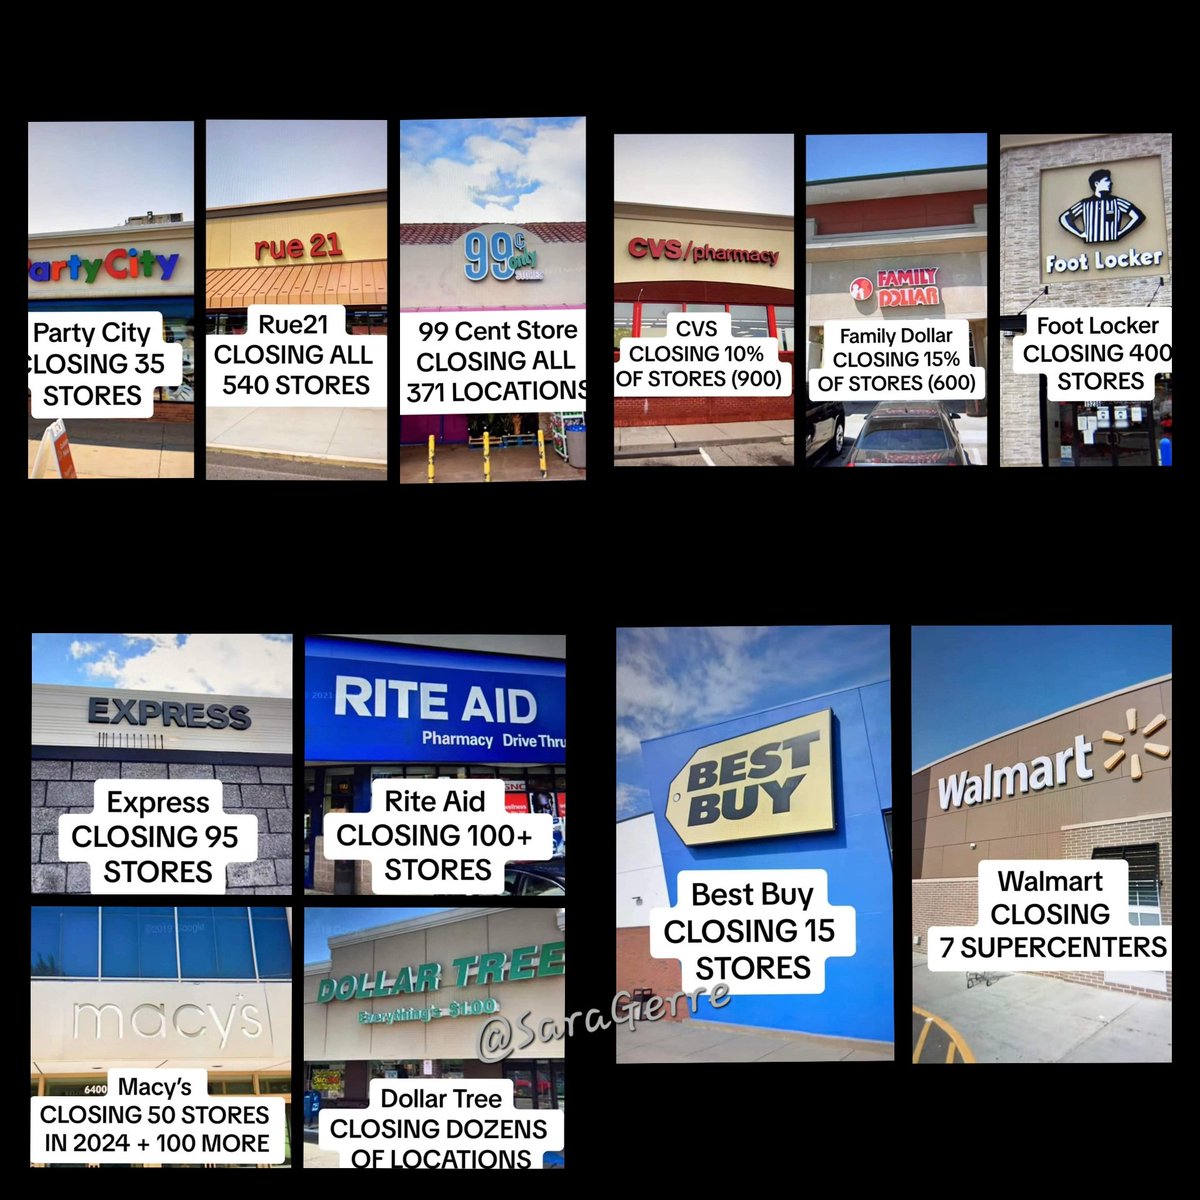 And now Red Lobster is expected to file bankruptcy by the end of the month. They are closing several locations across the US. Look below to see which ones ⬇️ BUT Biden is out here campaigning on how great the economy is, WE are just too dumb to realize it 🙄. #Trump2024